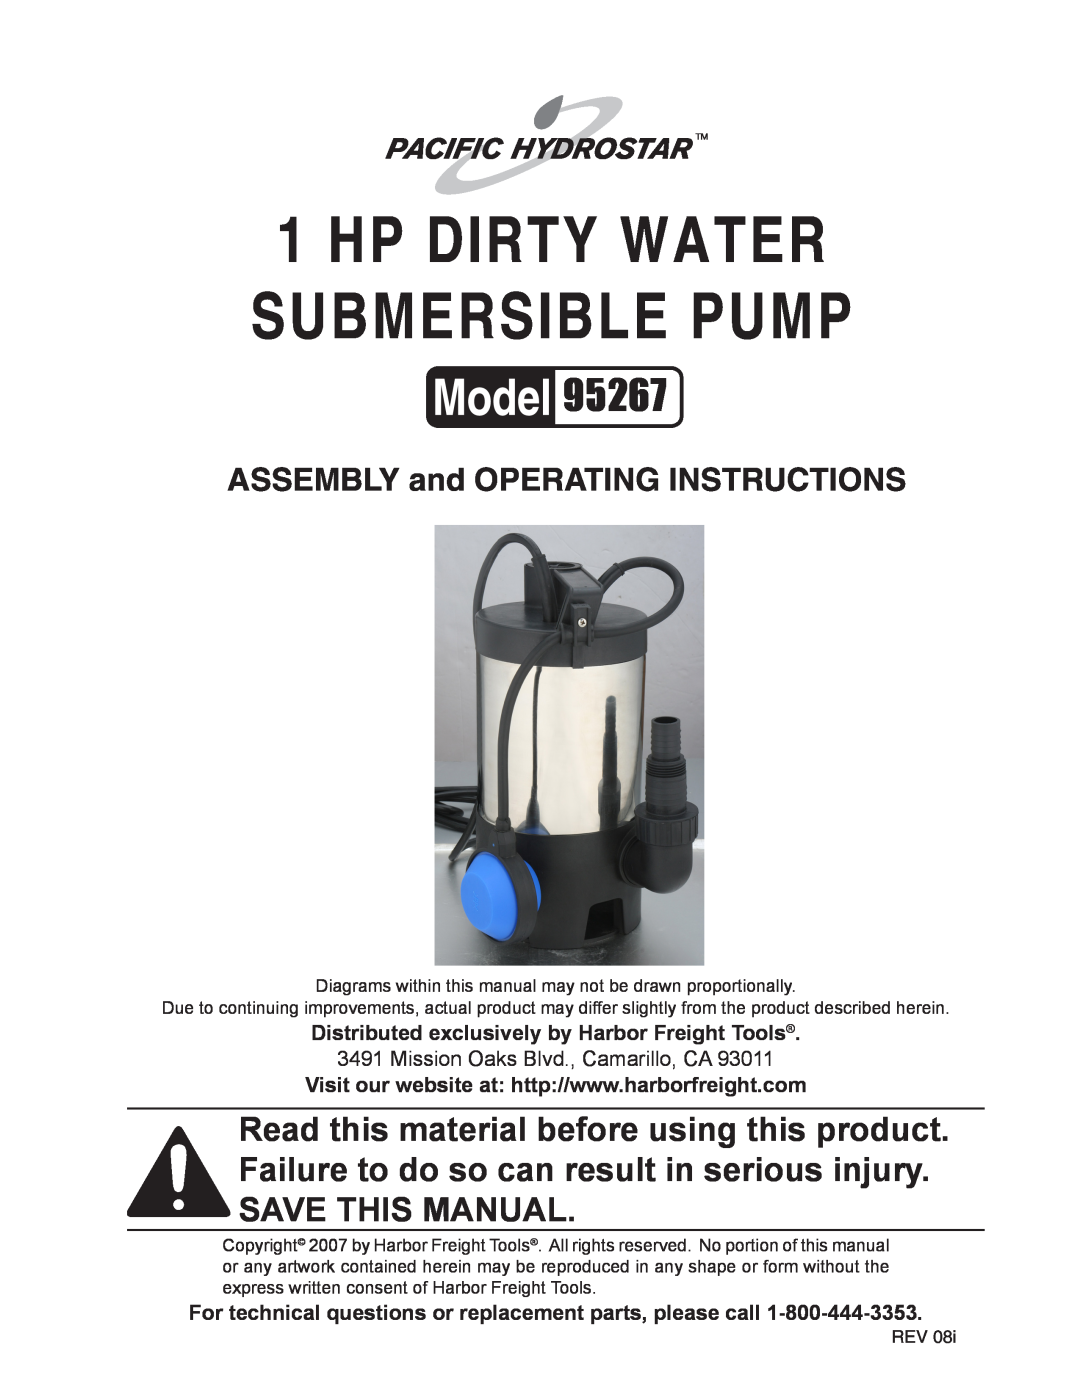 Harbor Freight Tools 95267 manual Hp Dirty Water Submersible Pump, ASSEMBLY and OPERATING INSTRUCTIONS 